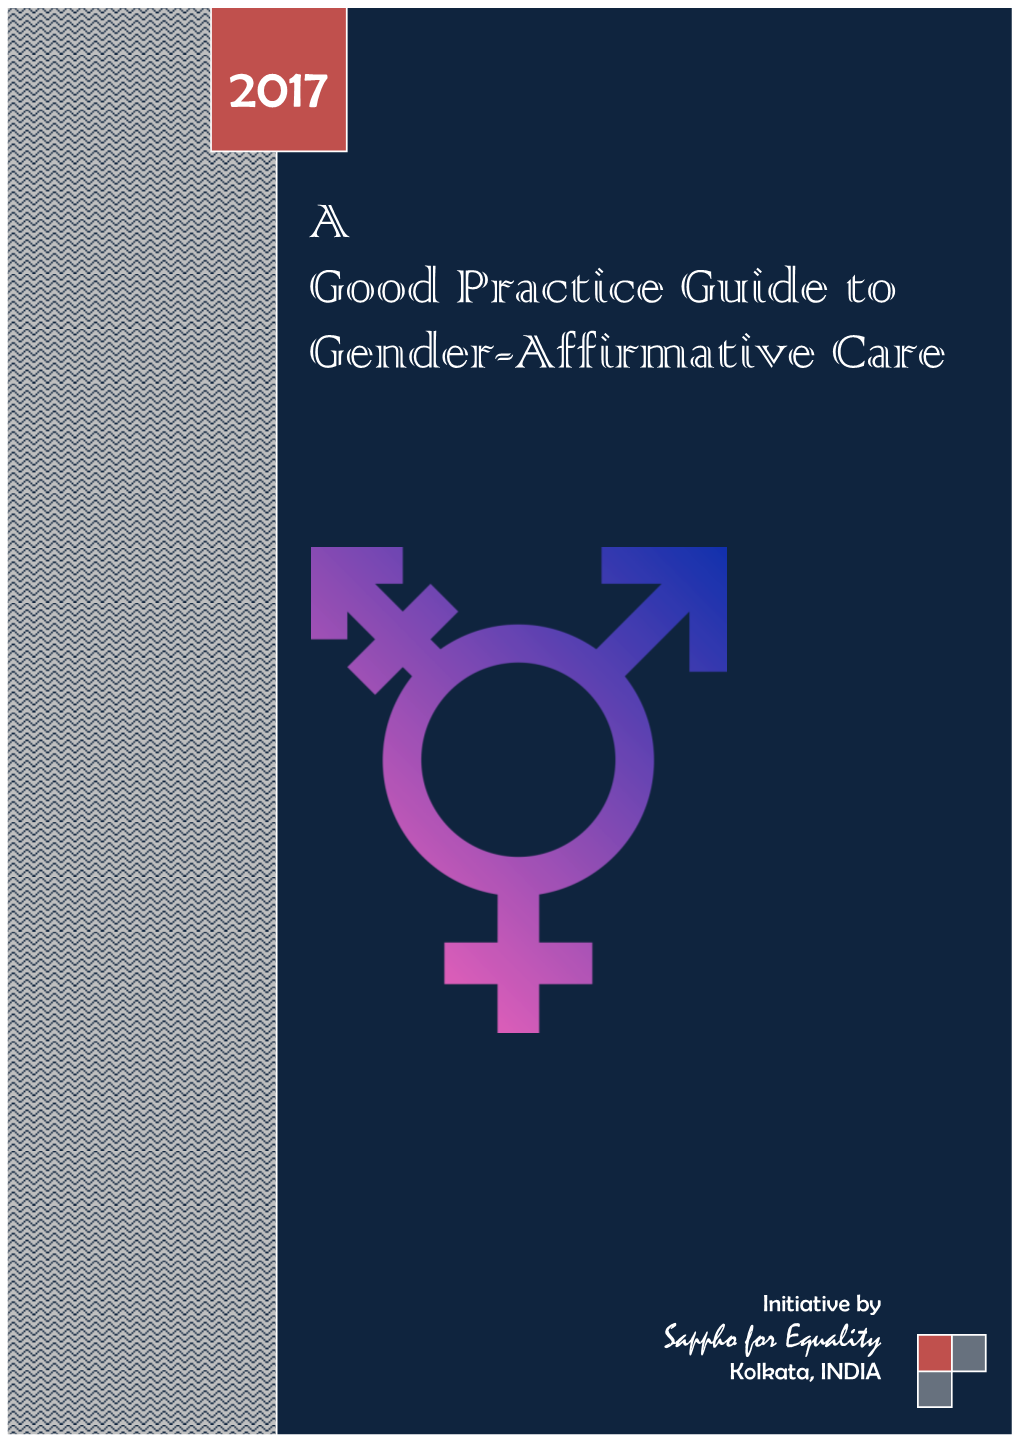 A Good Practice Guide to Gender-Affirmative Care